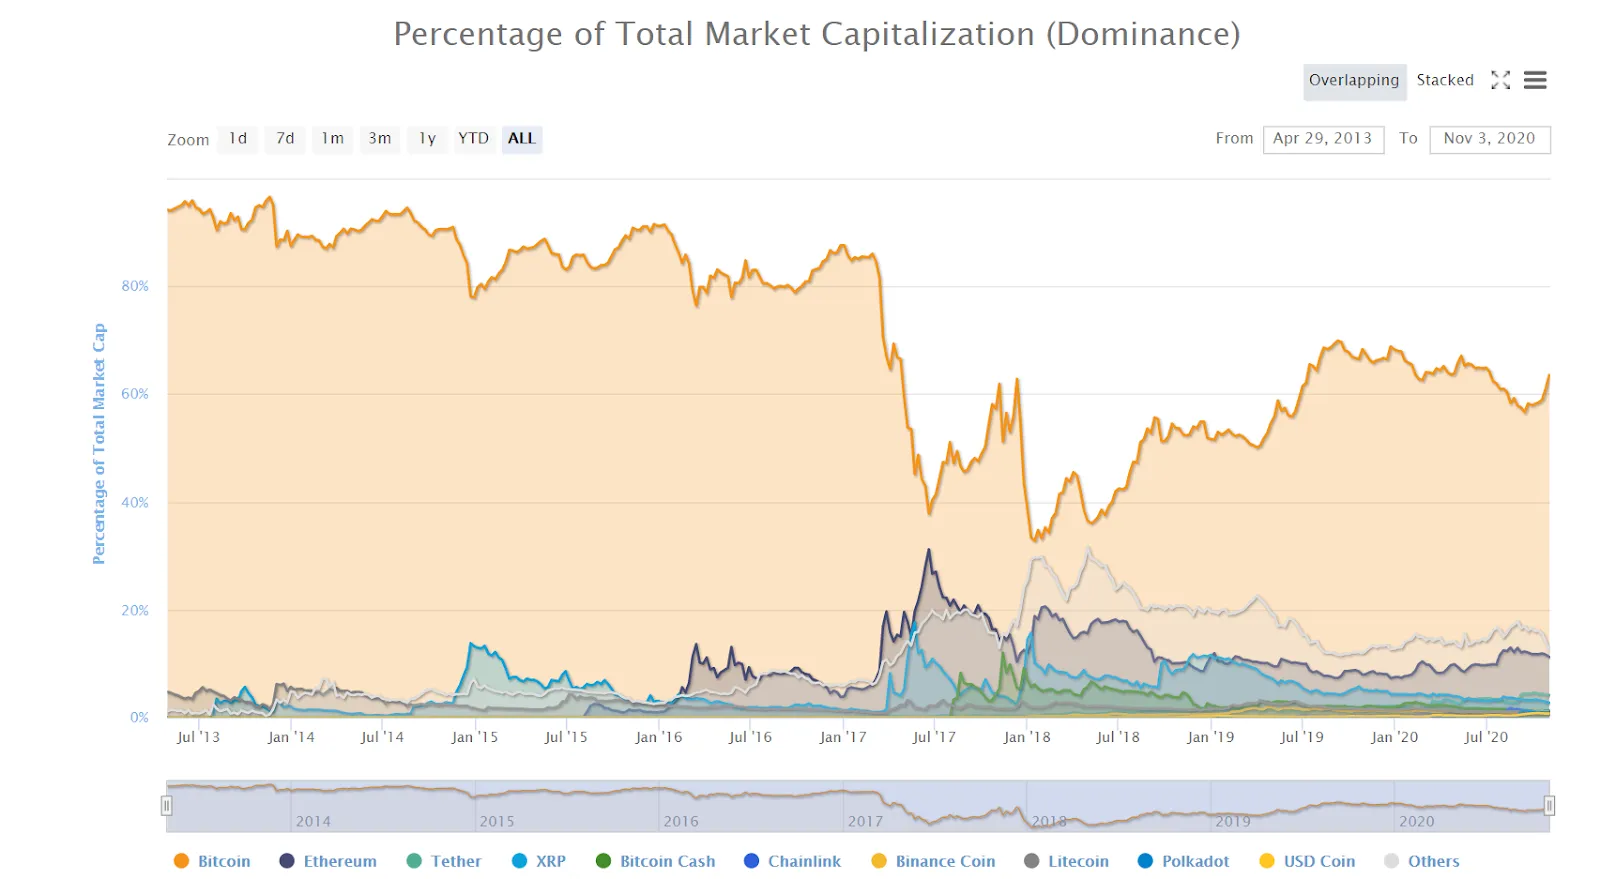 Bitcoin dominance as measured by percentage of total crypto market cap share.